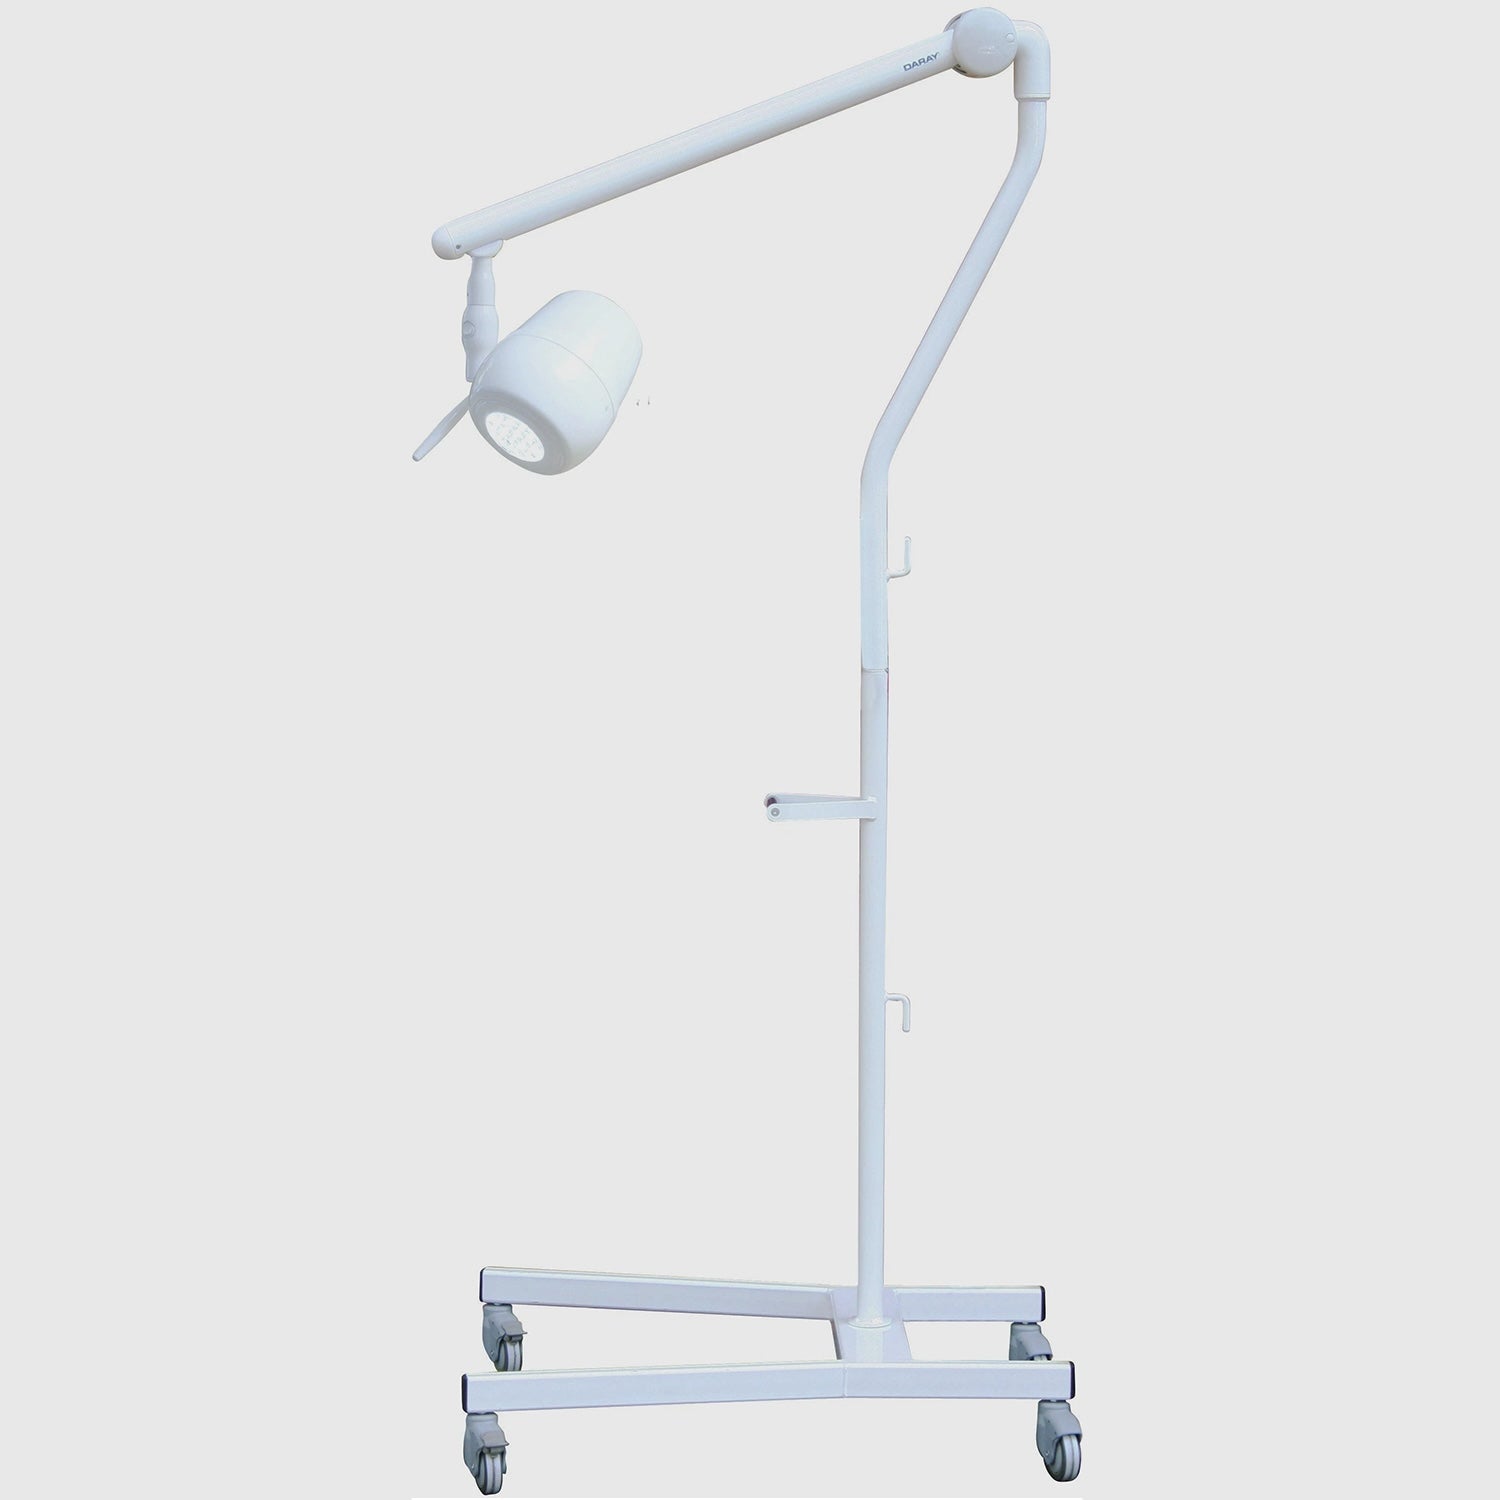 Daray S180 LED Minor Surgical Light (2)